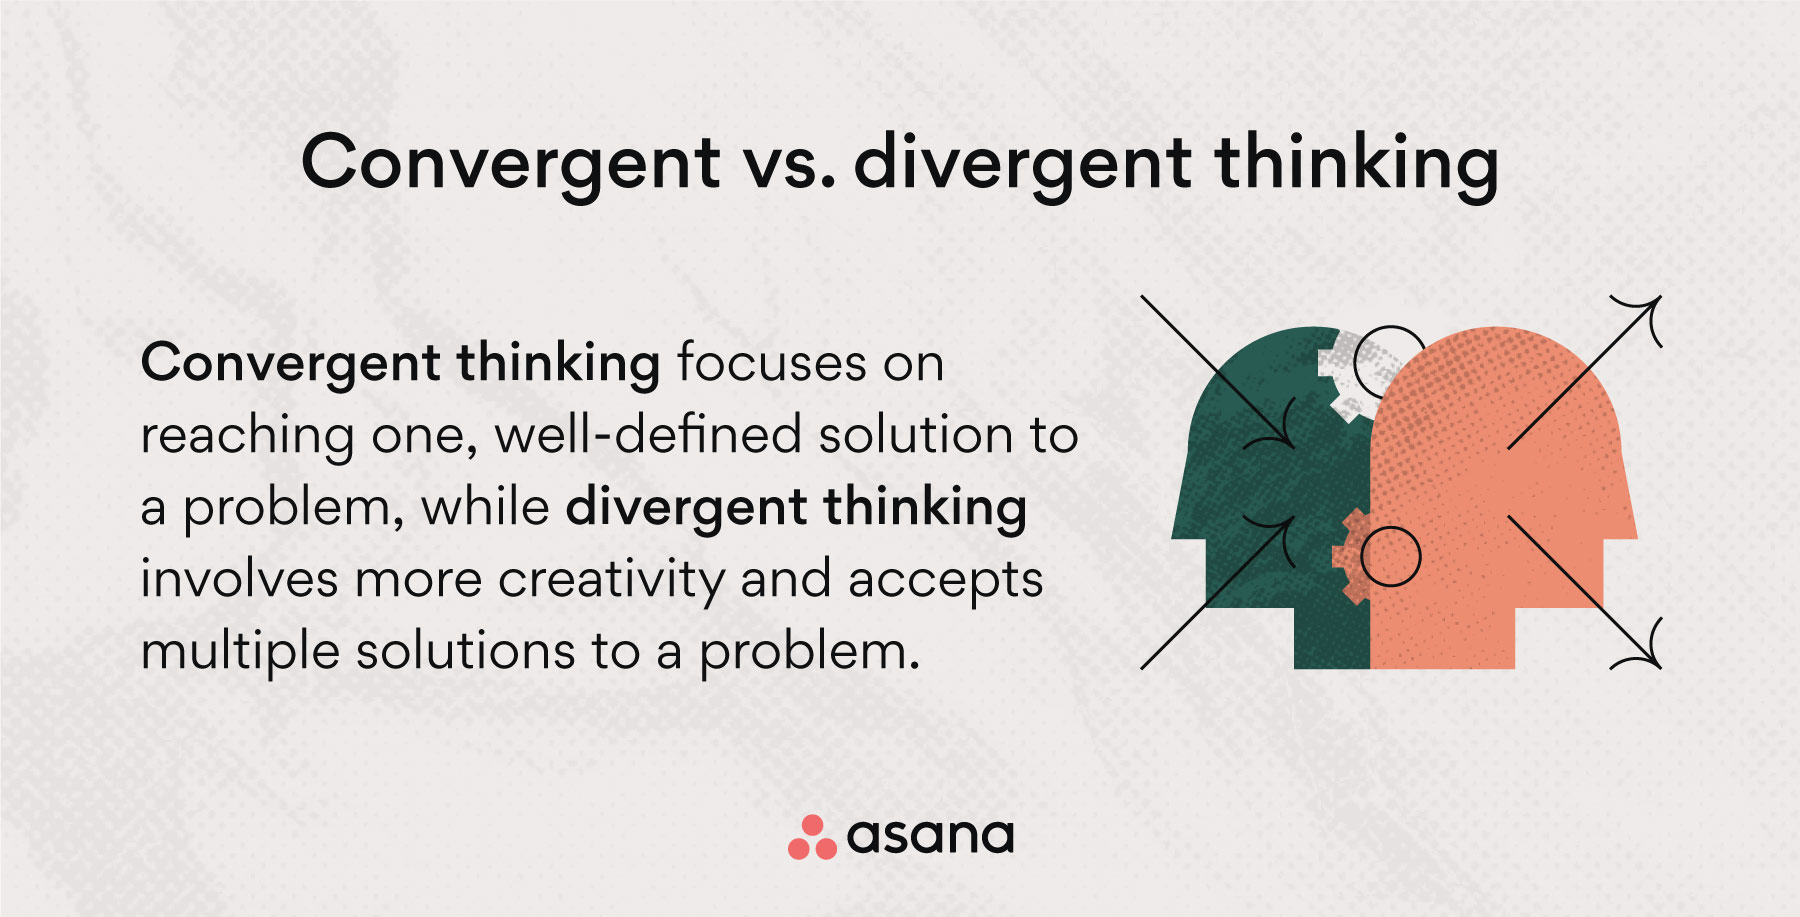 The difference between convergent and divergent